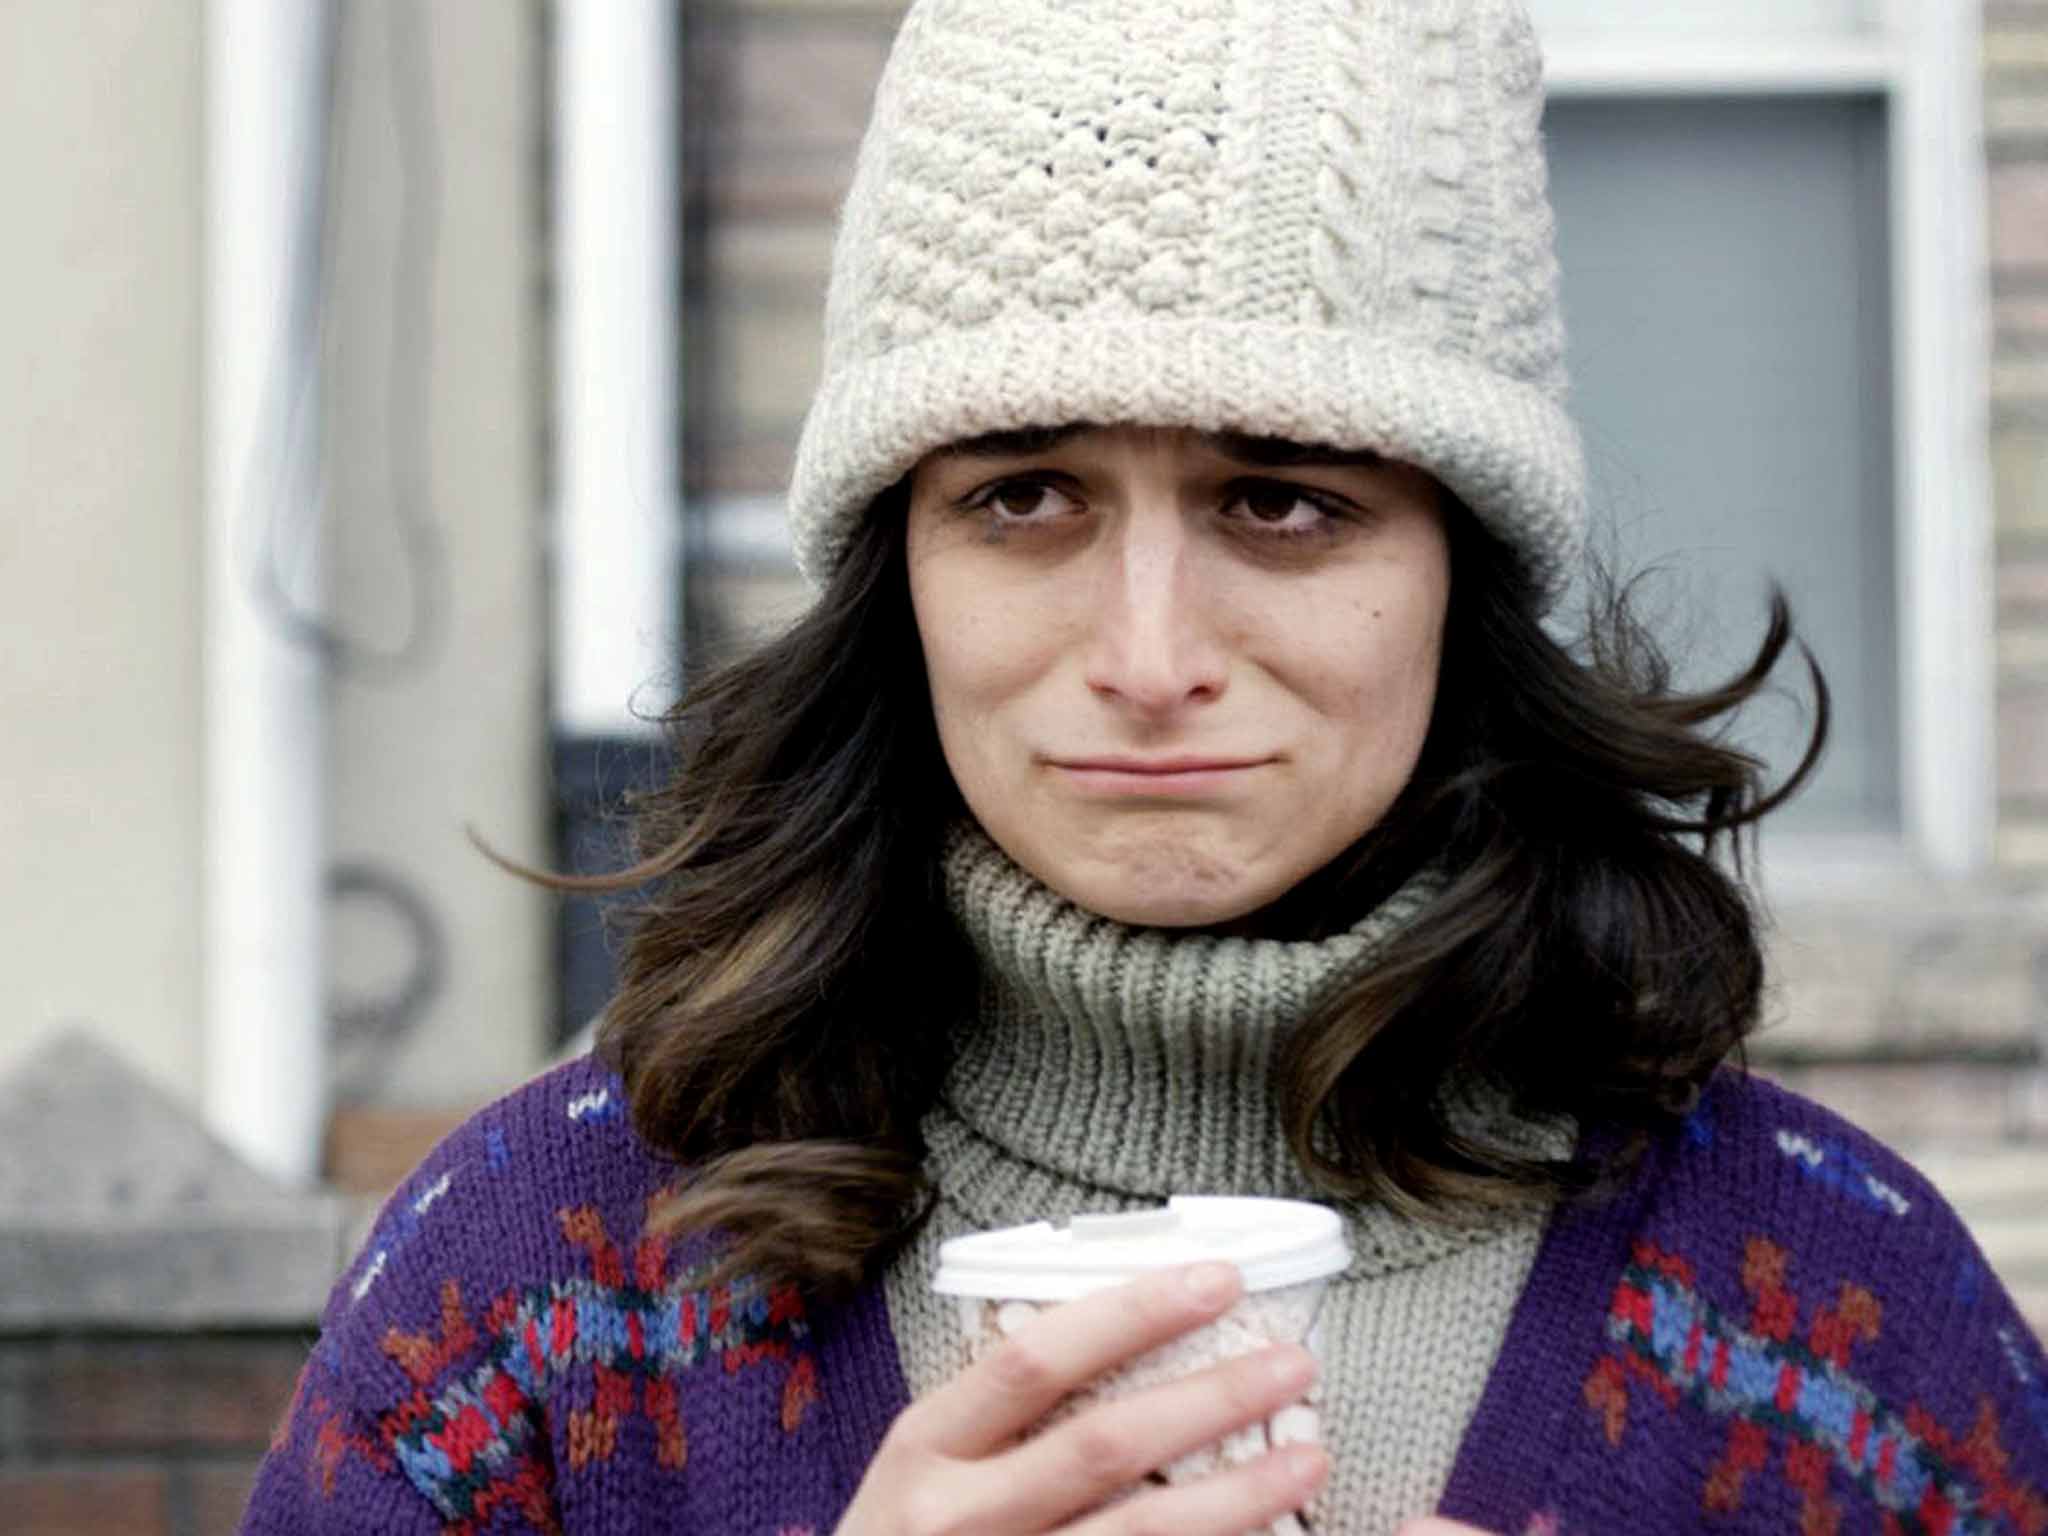 Single-minded: in the film 'Obvious Child', Jenny Slate plays a woman who doesn't feel a great stigma attached to having an abortion